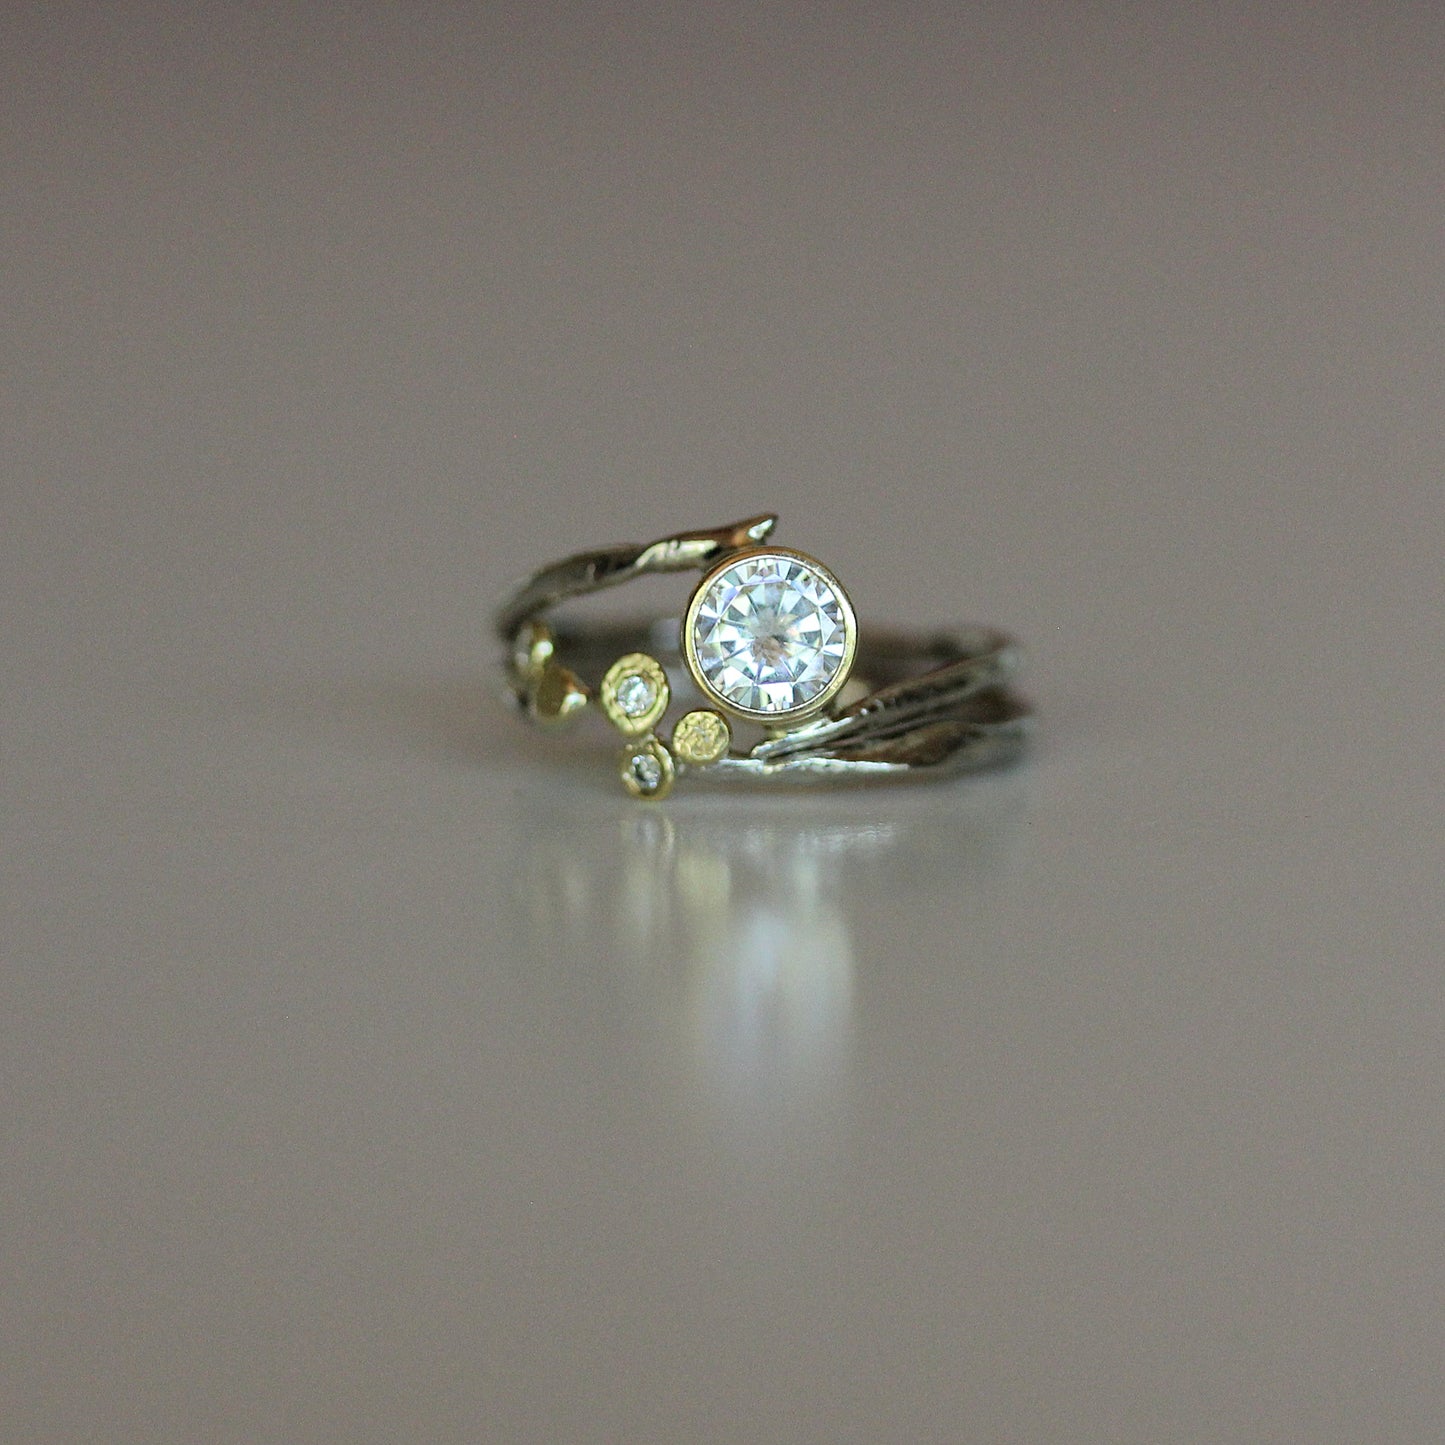 one of a kind engagement ring set in 18k yellow gold, 14k white gold.